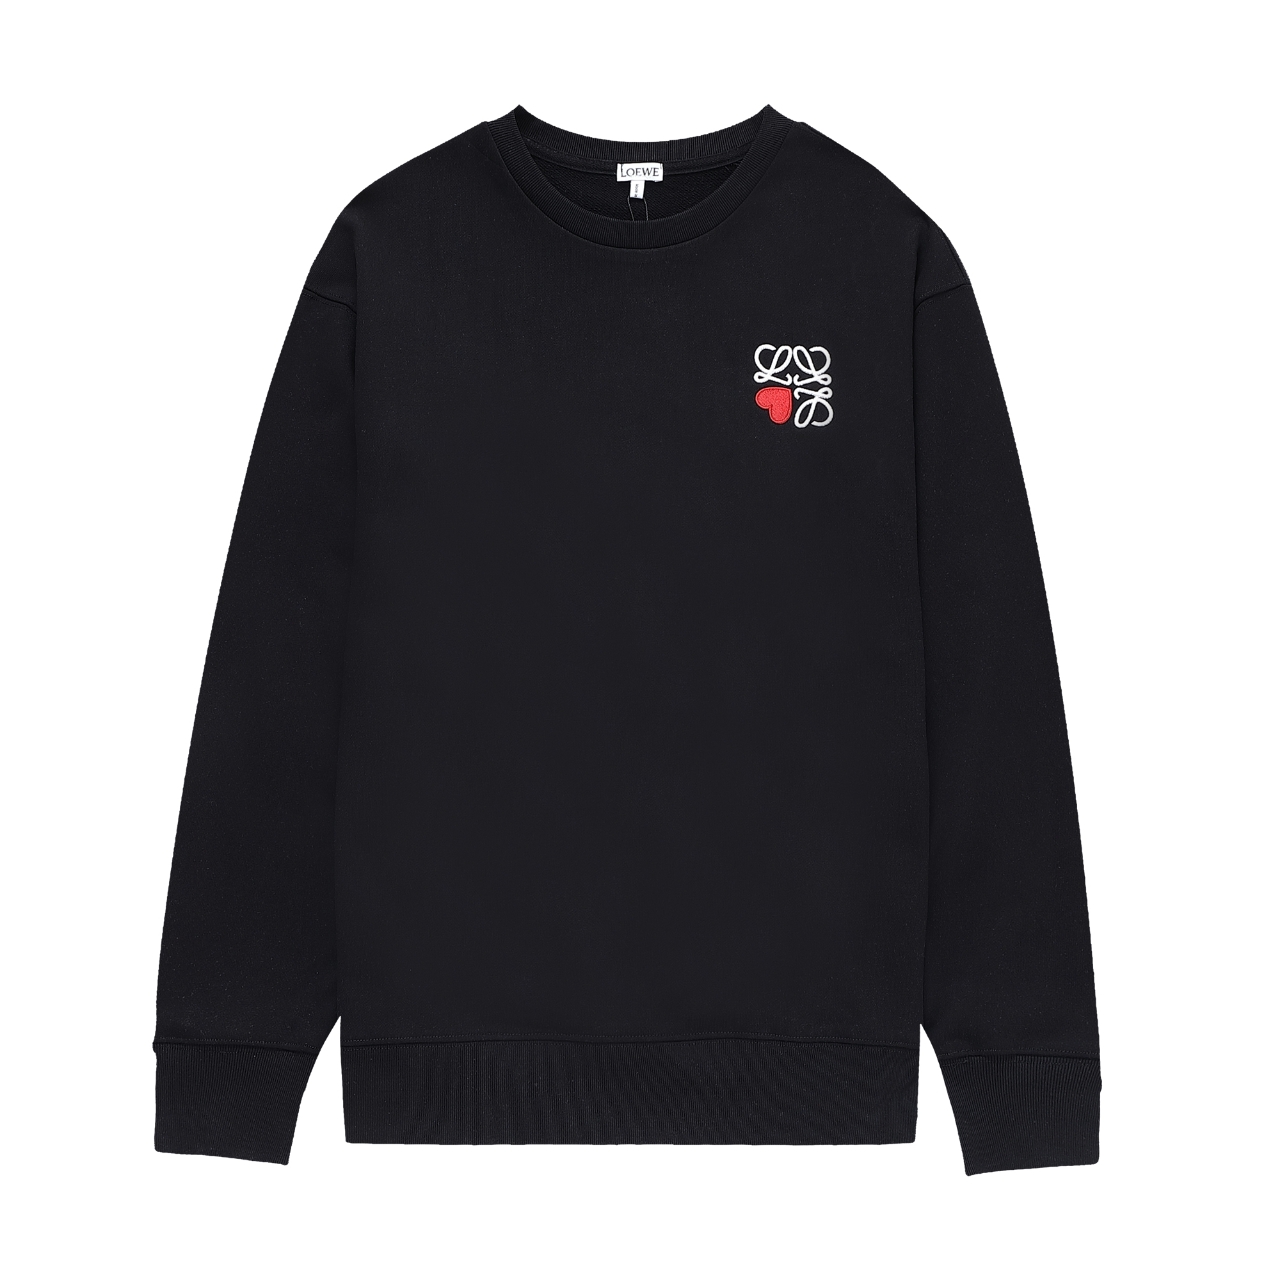 Loewe Clothing Sweatshirts Buy First Copy Replica
 Black White Embroidery Cotton